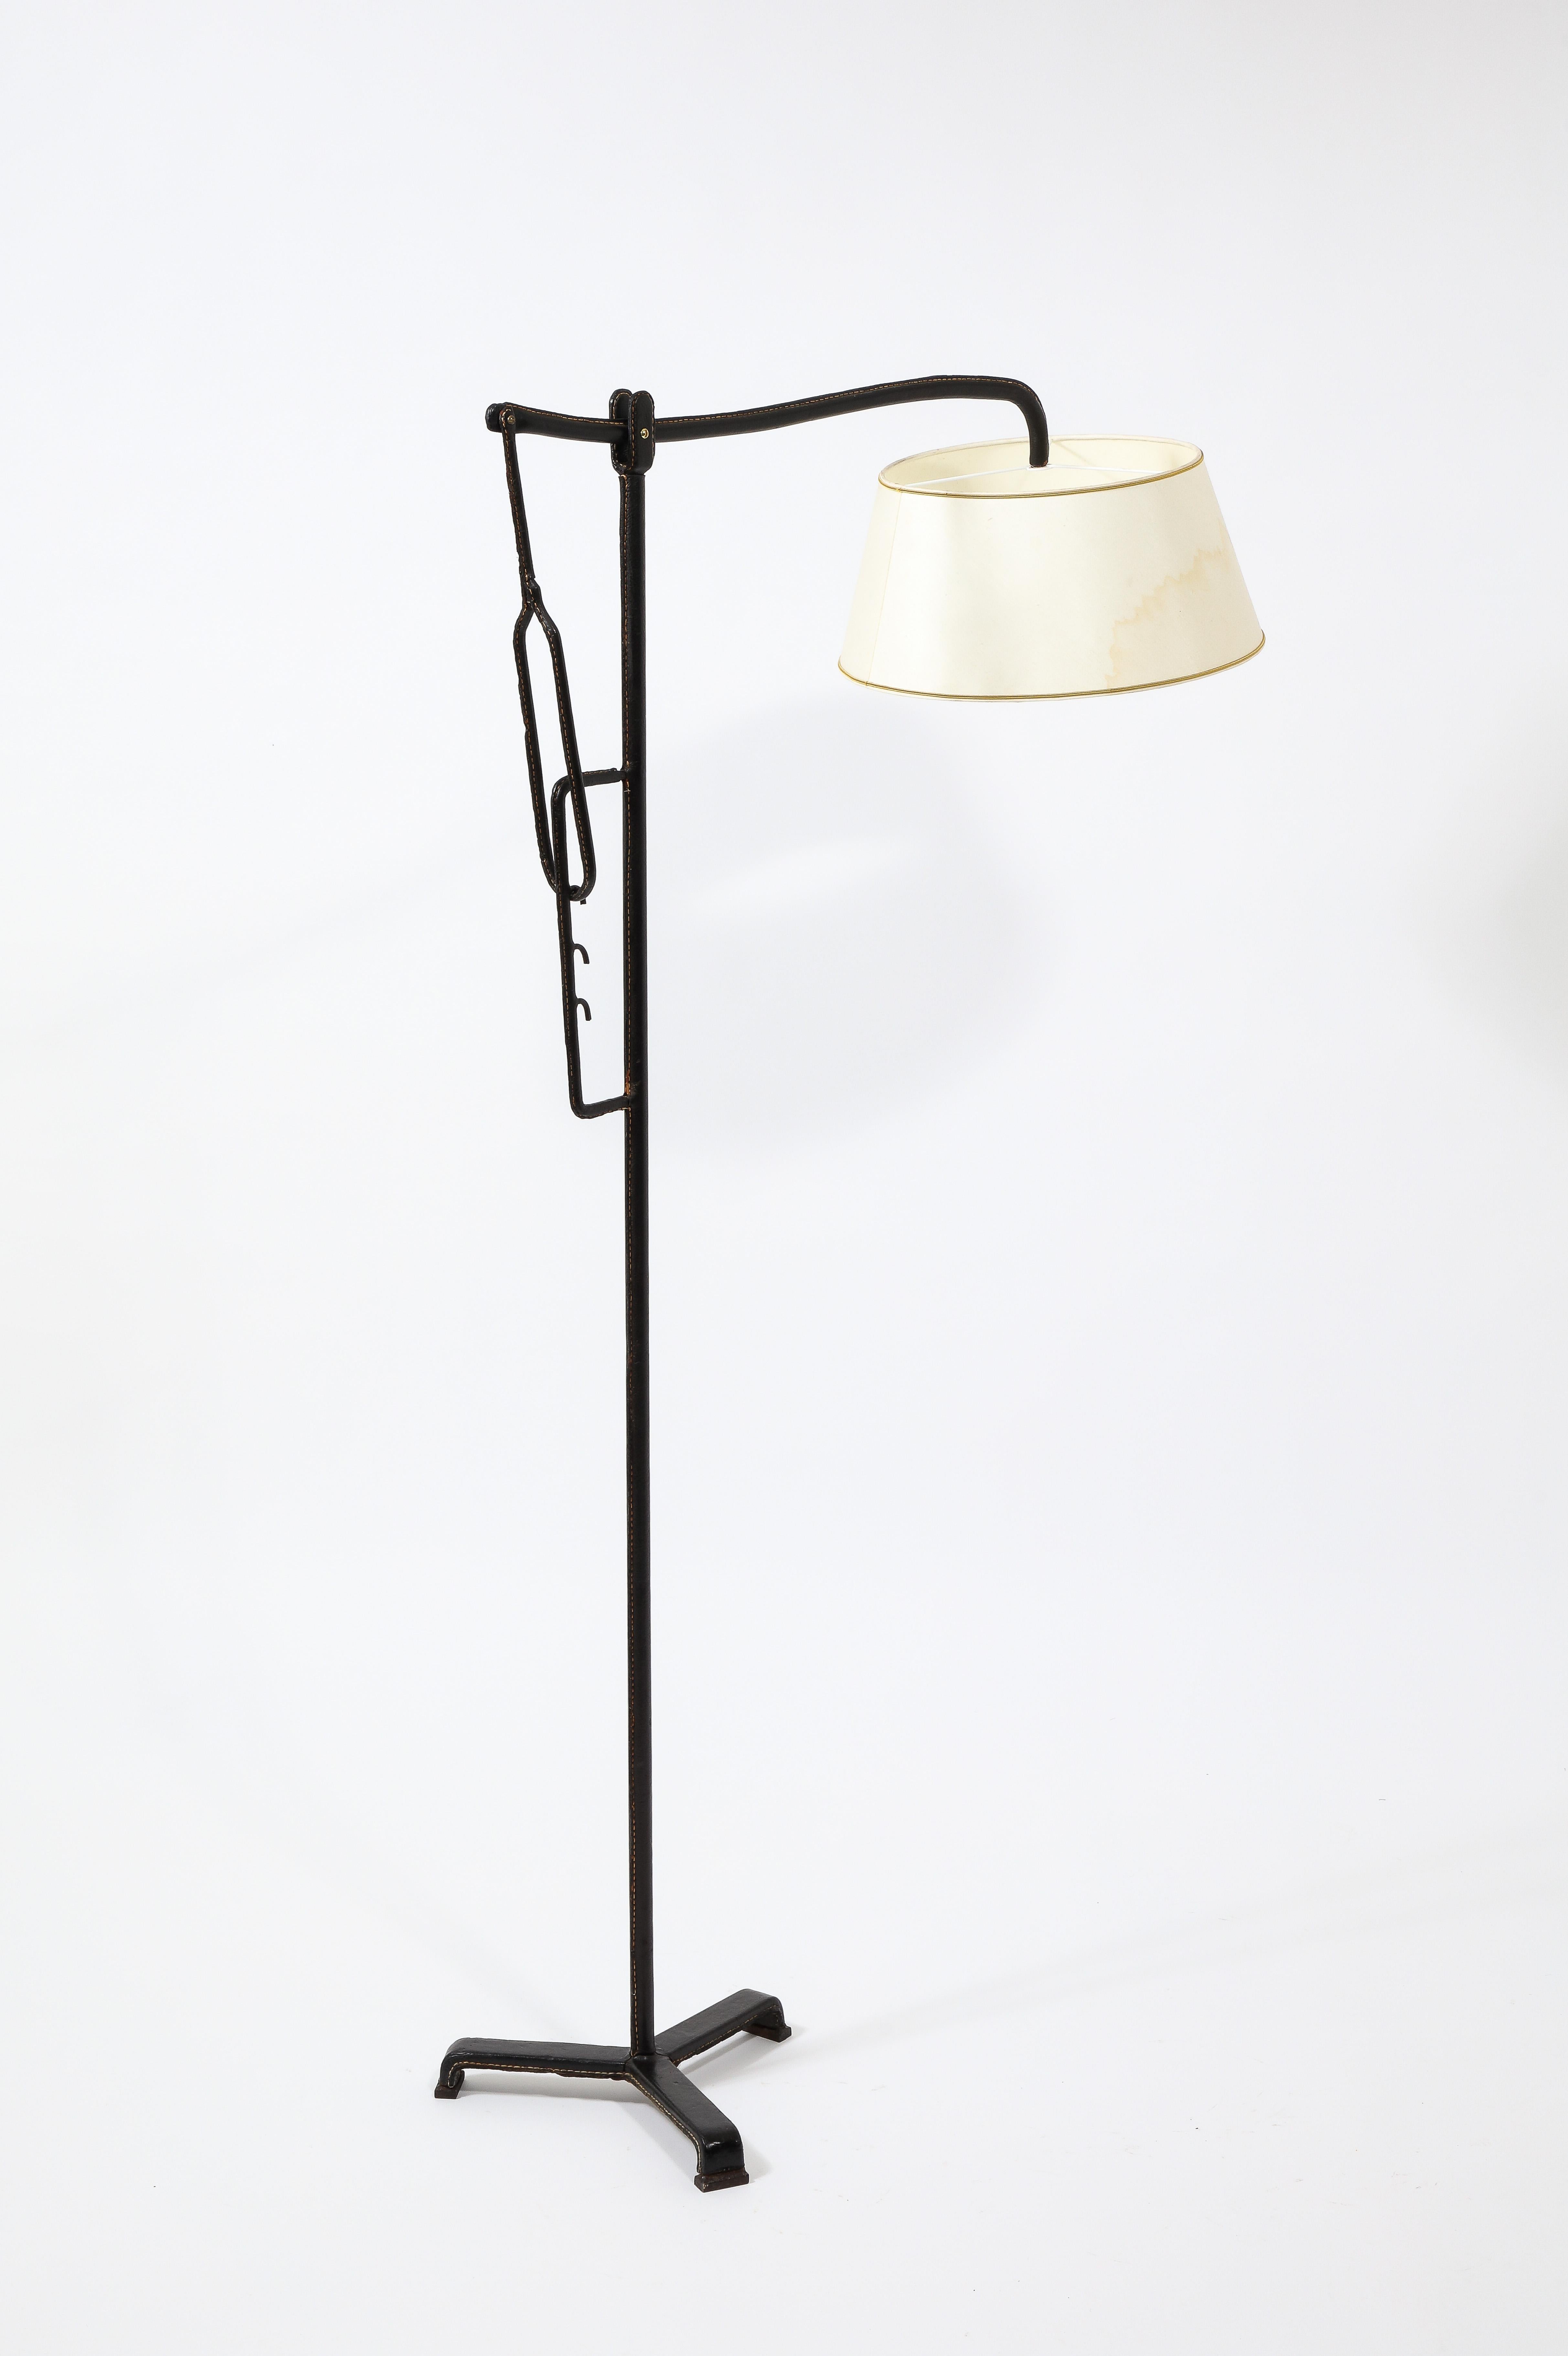 Jacques Adnet Black Leather Potence Floor Lamp, France 1940's For Sale 1